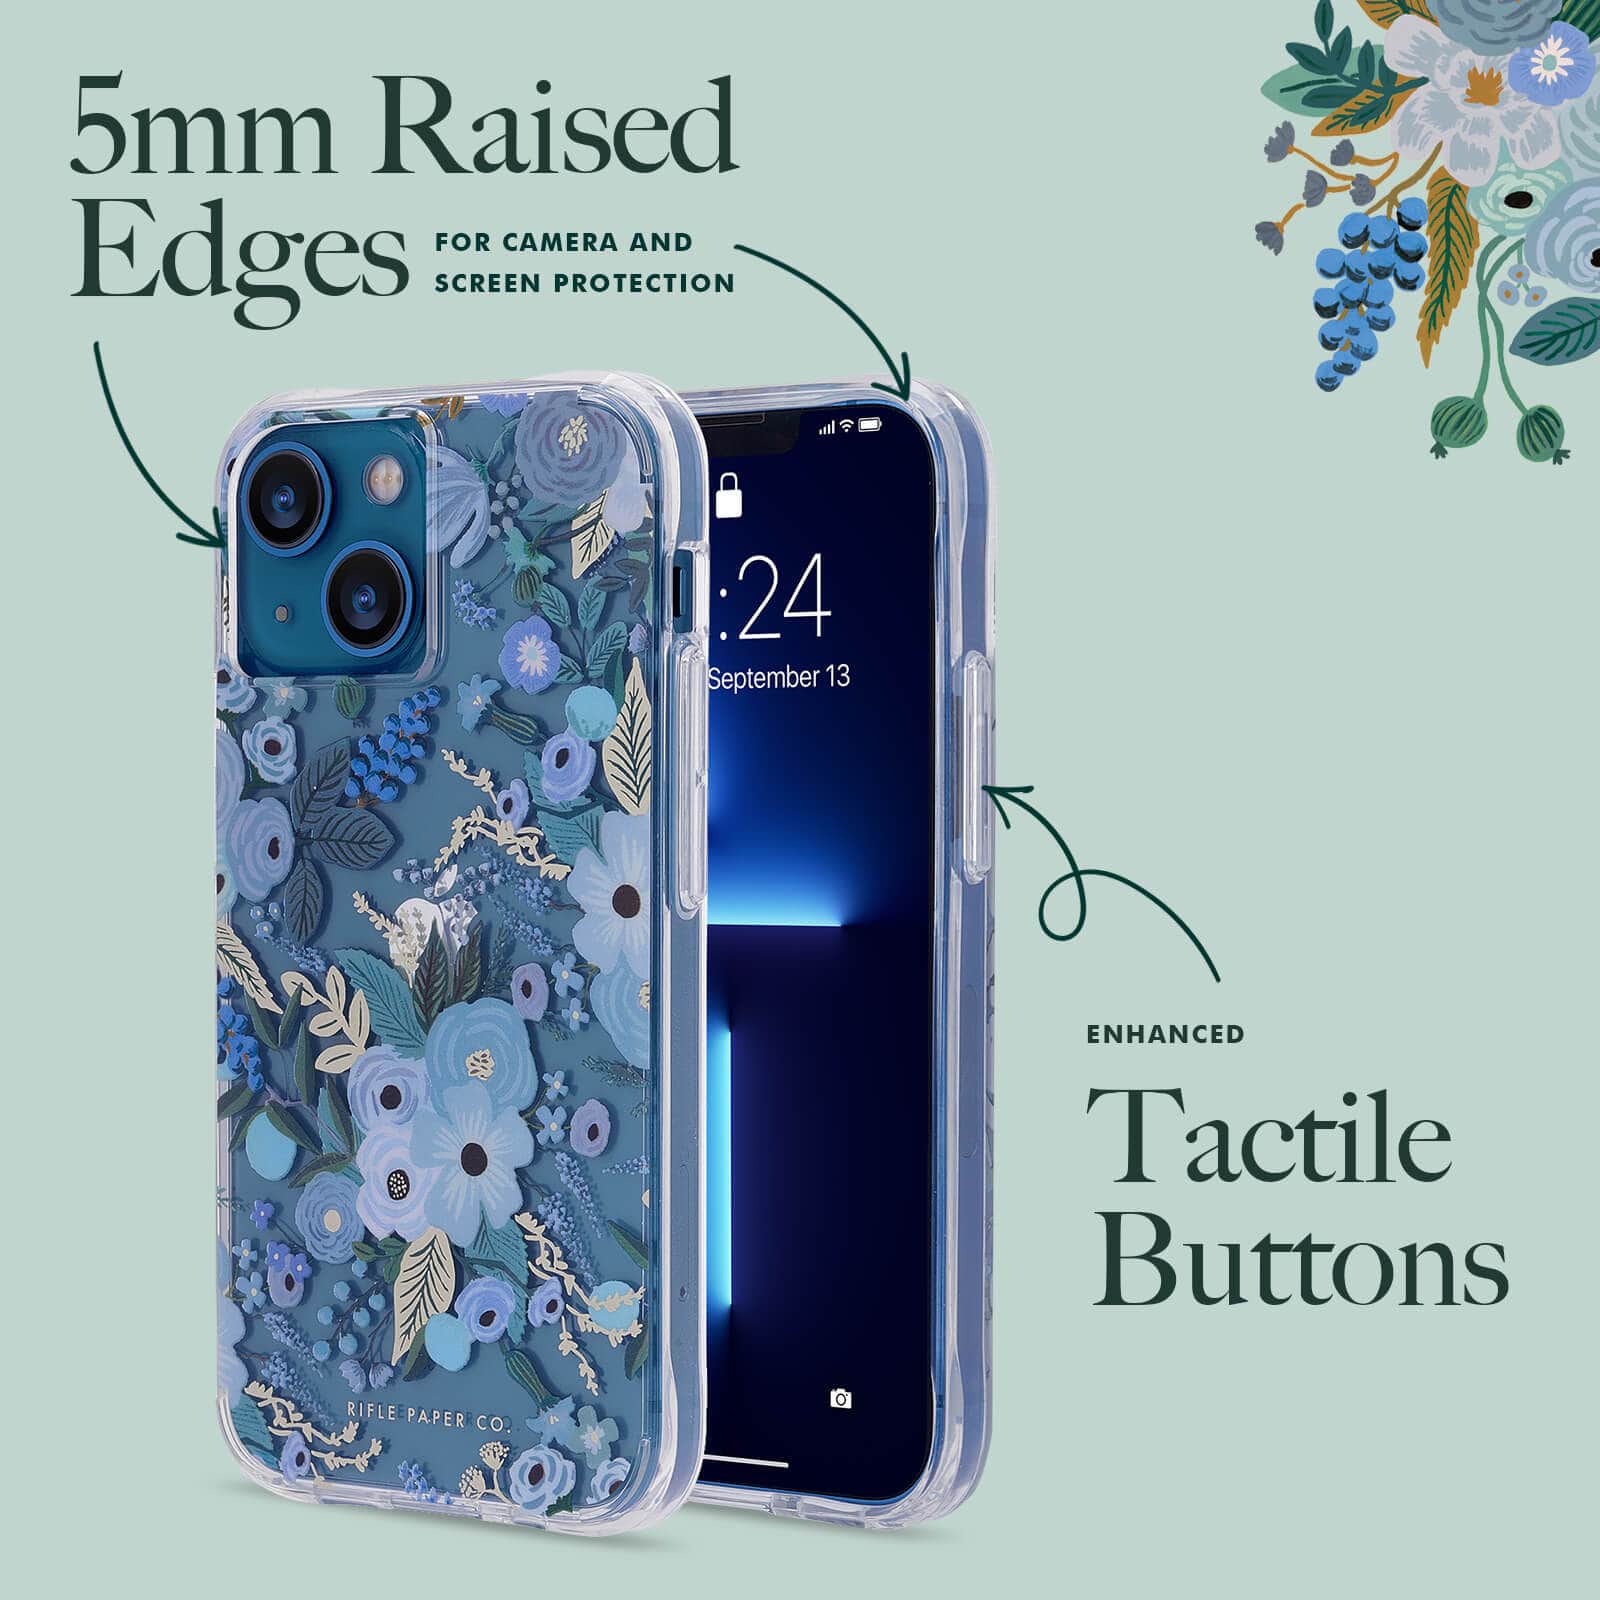 5mm Raised edges for camera and screen protection. Enhanced tactile buttons. color::Garden Party Blue